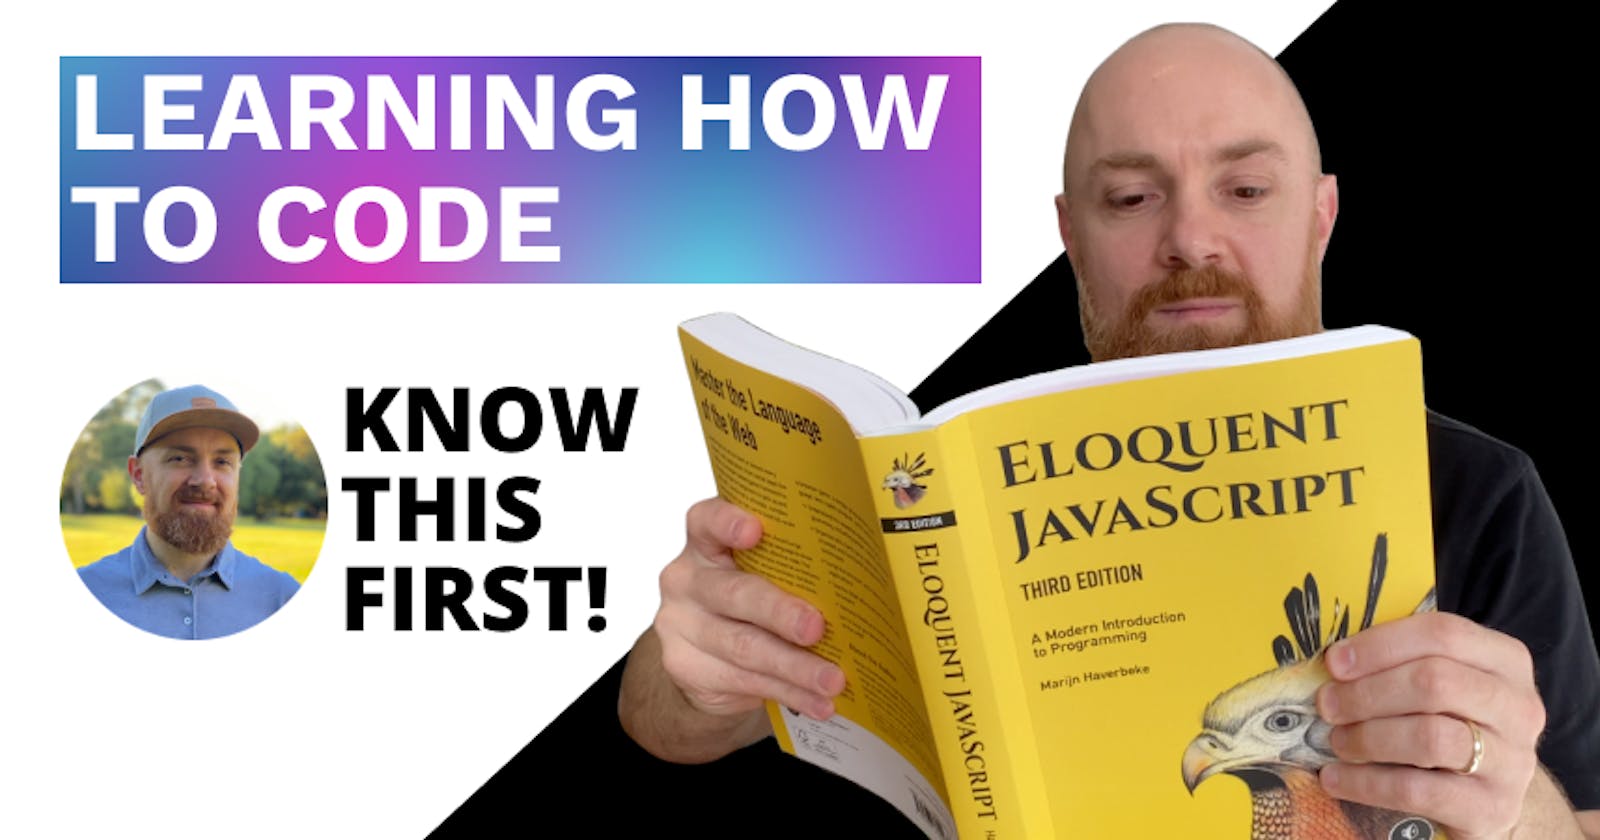 Learning how to code: what you should know first (part 1)